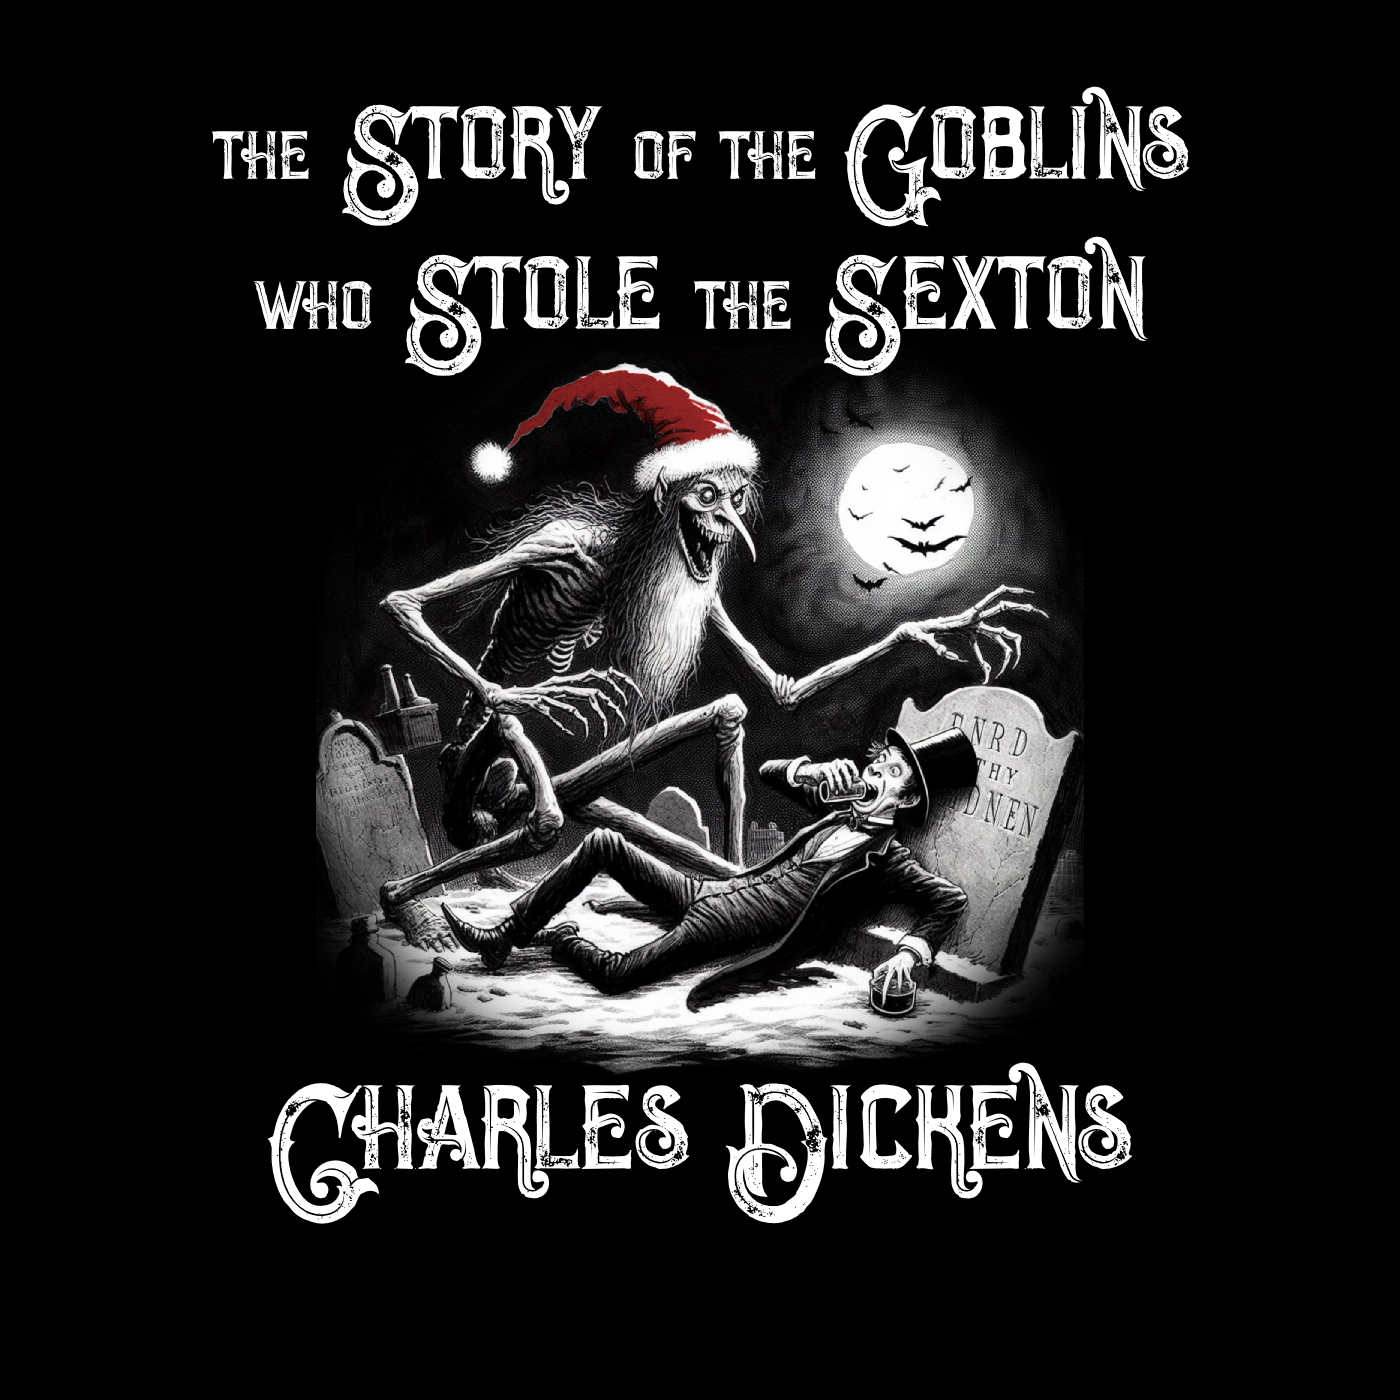 The Story of the Goblins Who Stole a Sexton, by Charles Dickens